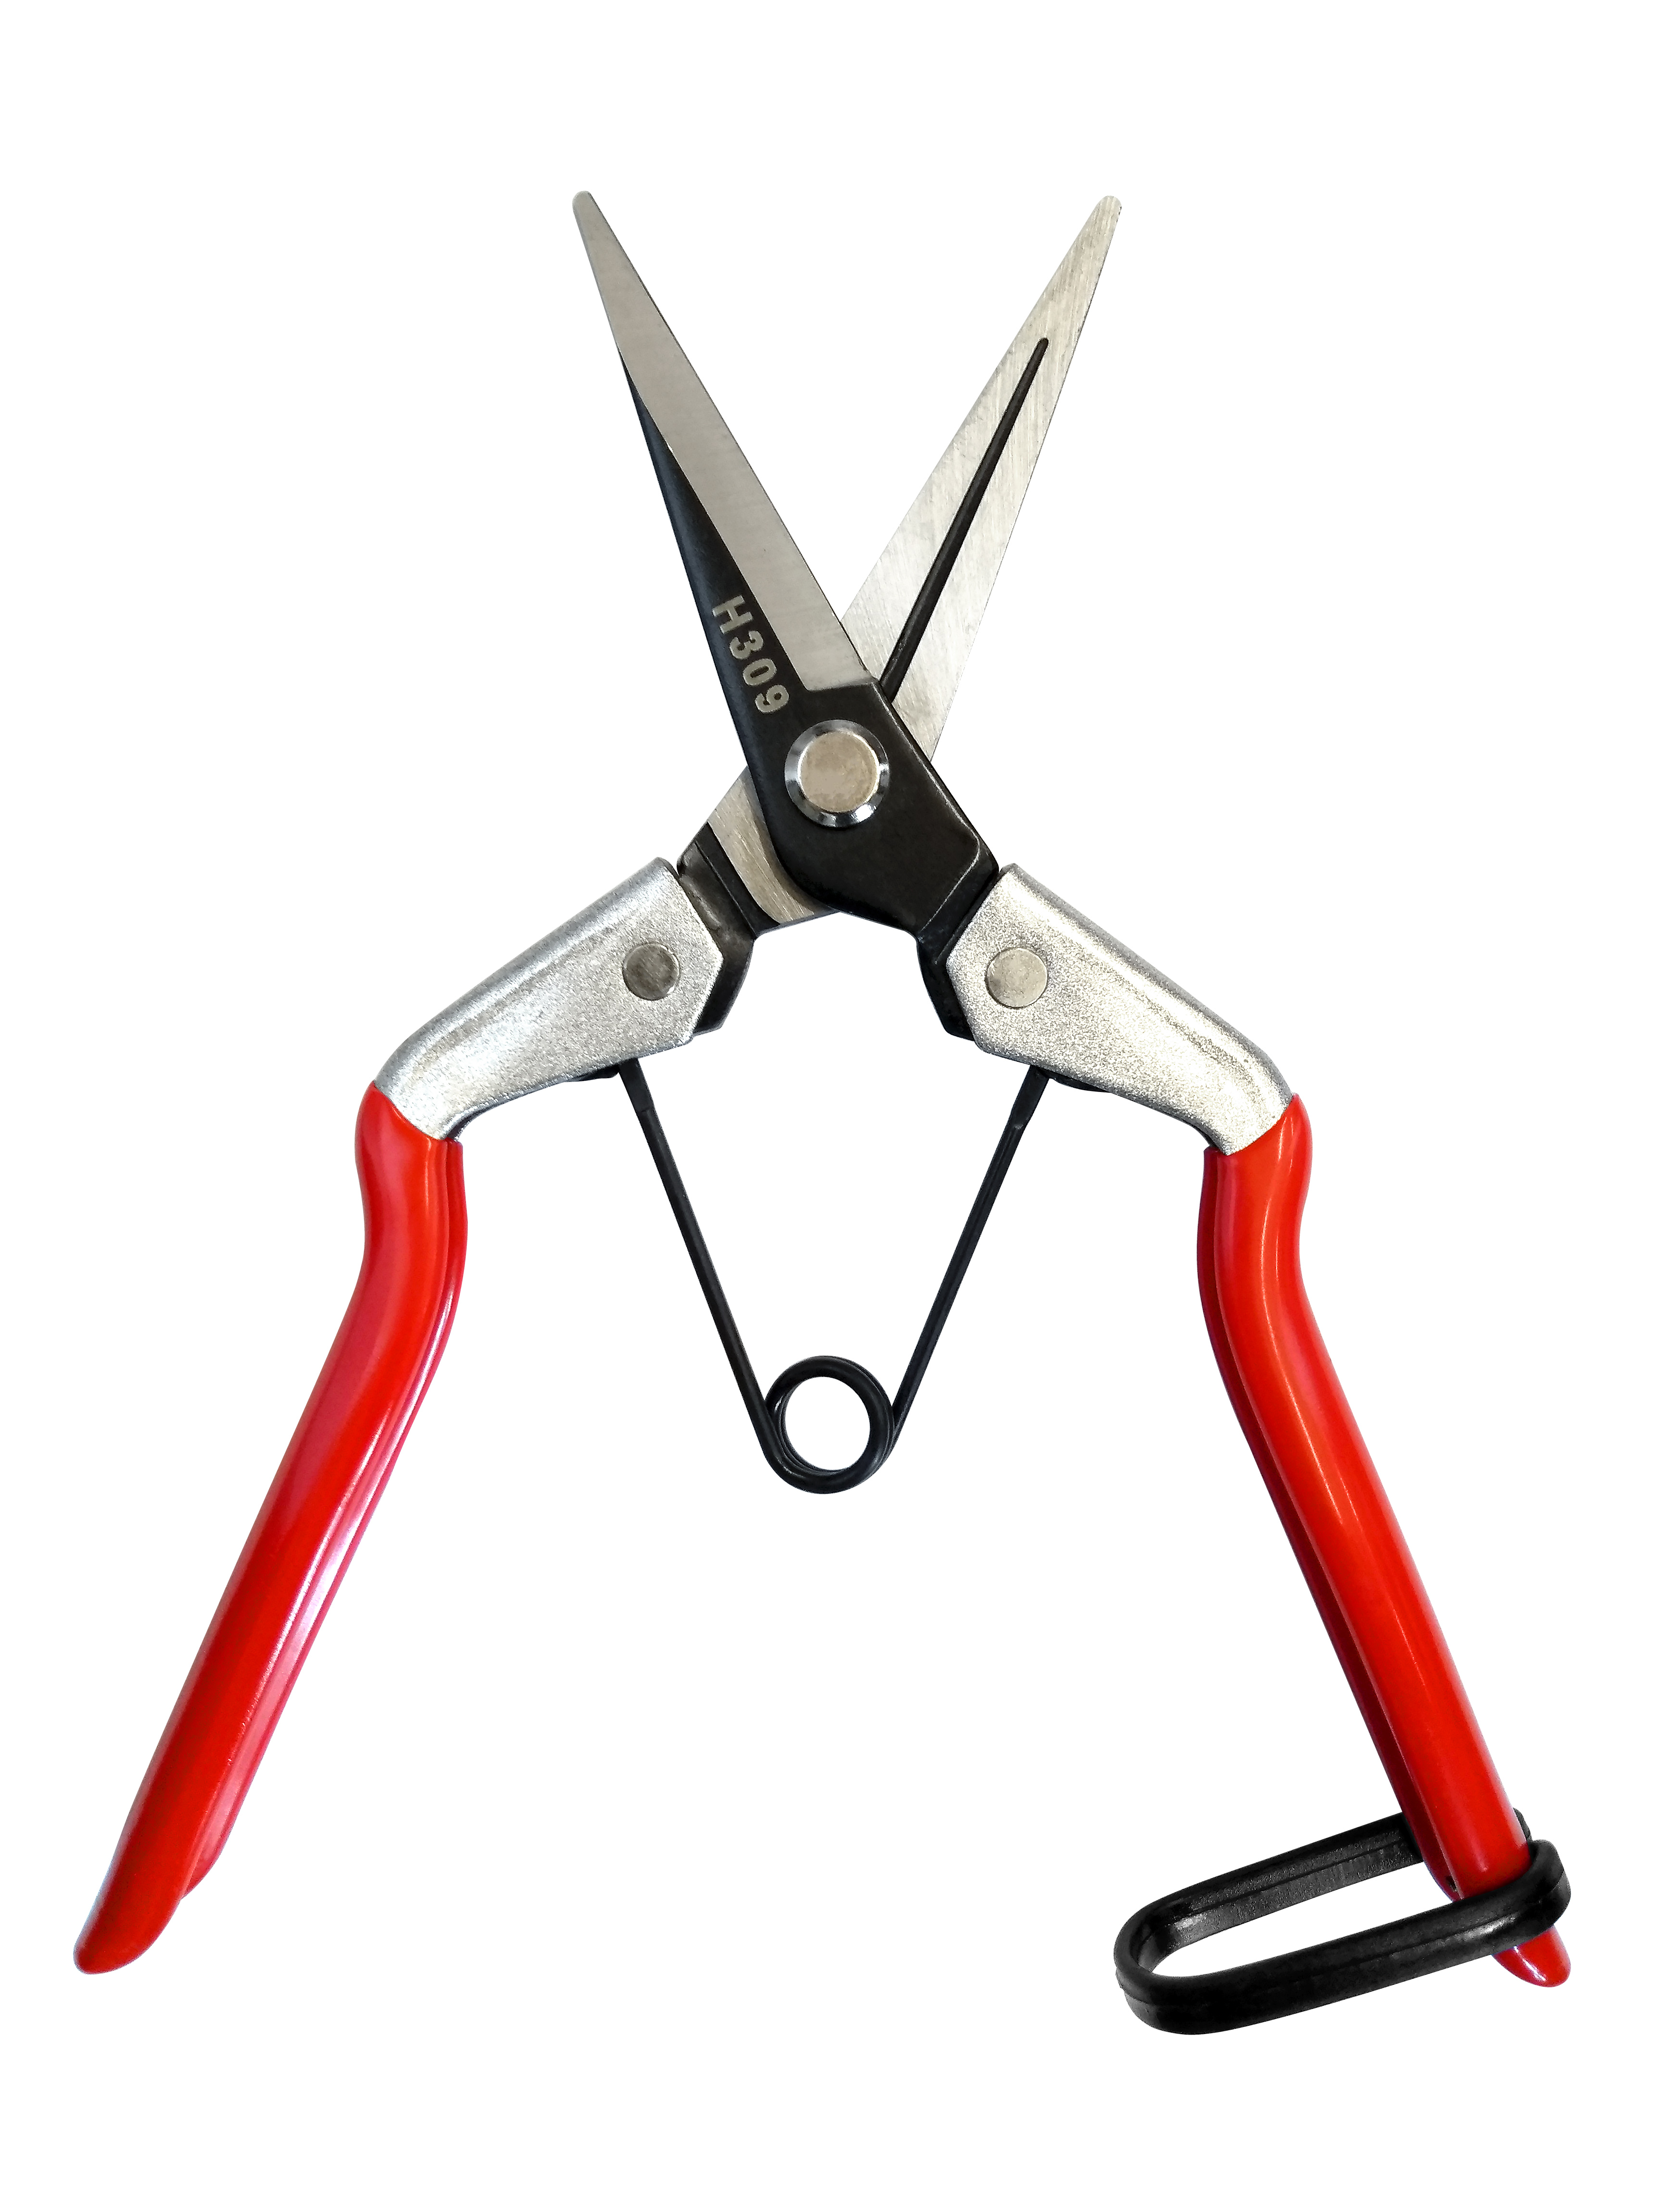 Zenport Shears H309 Box of 10, Deluxe Thinning Shear 7-Inch Long with Wishbone Spring